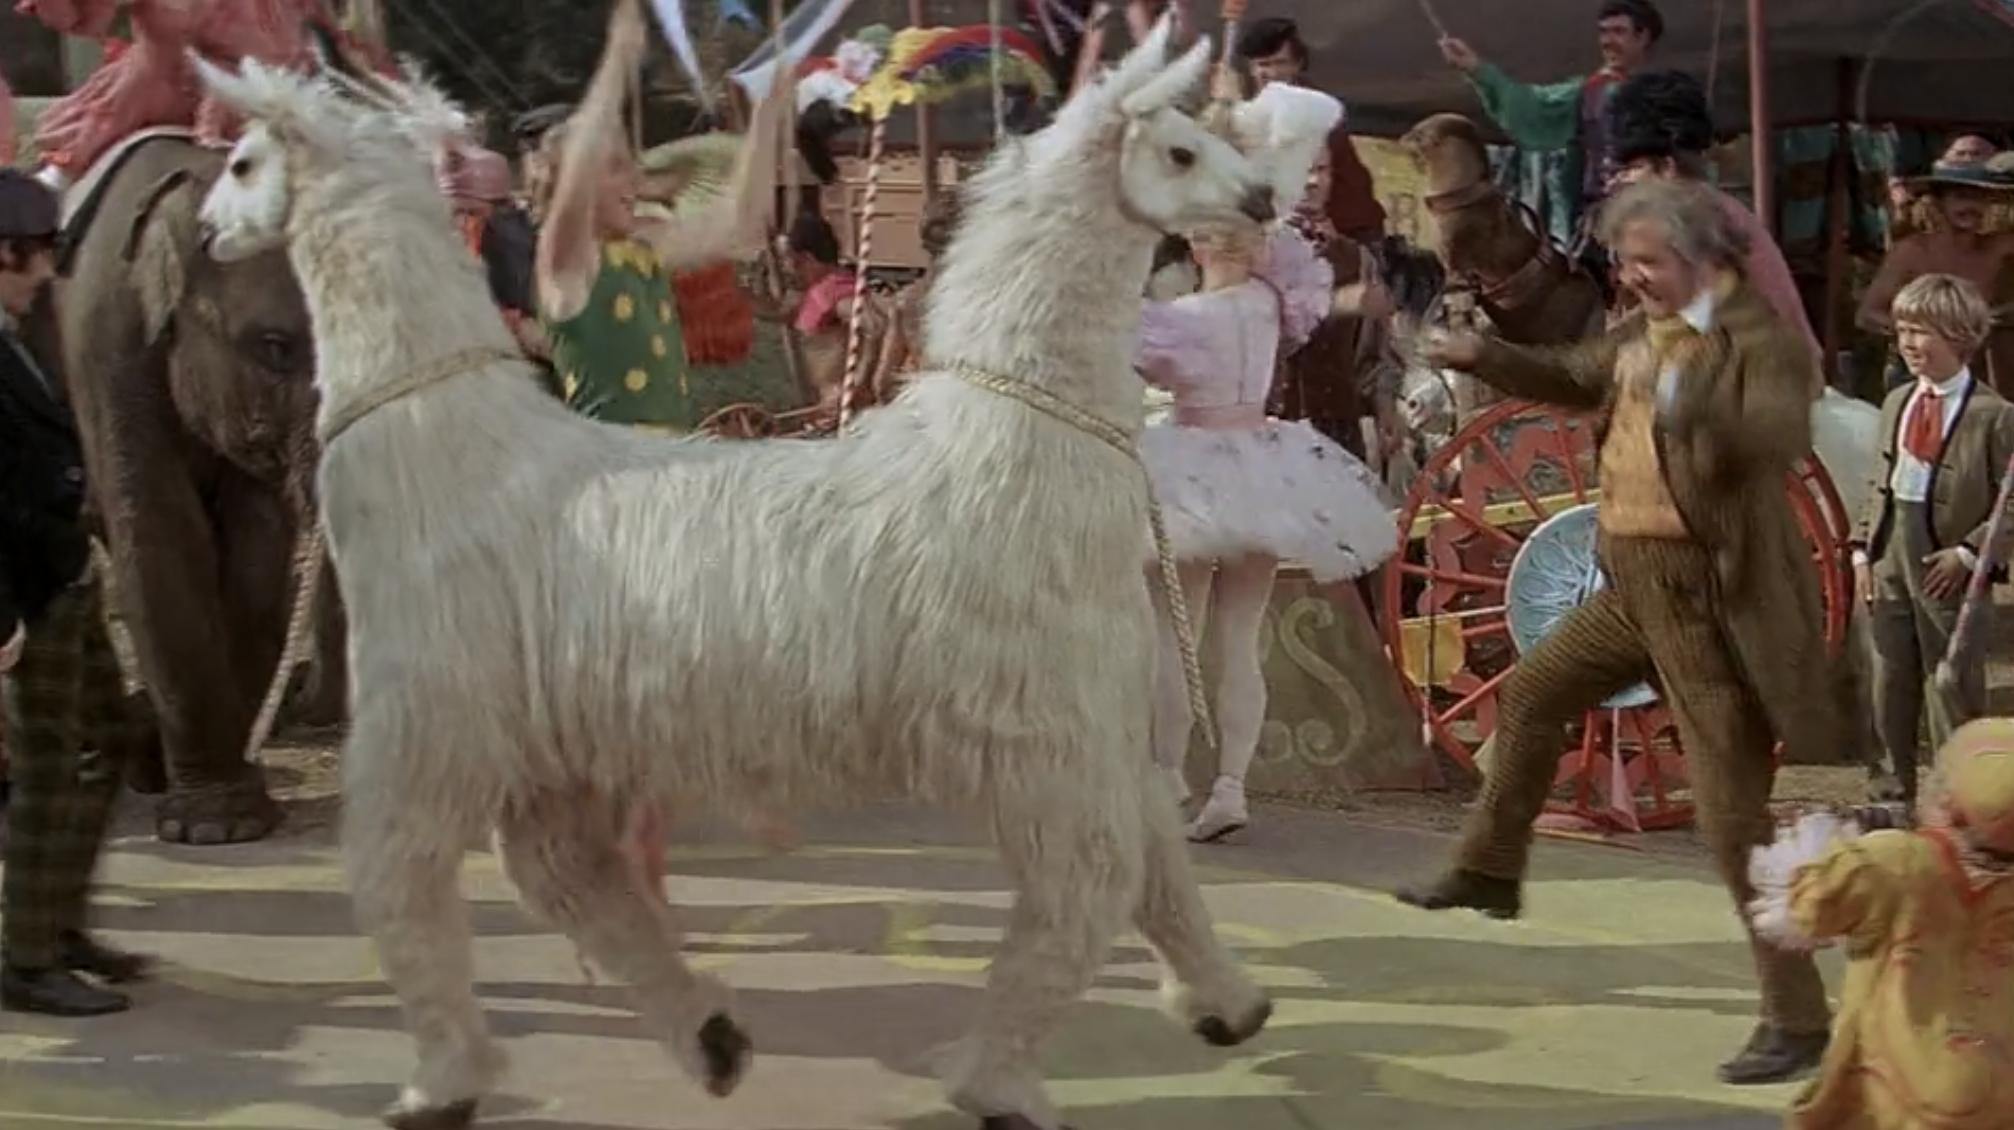 The best part of Dr. Dolittle universe is the pushmi-pullyu | The Week